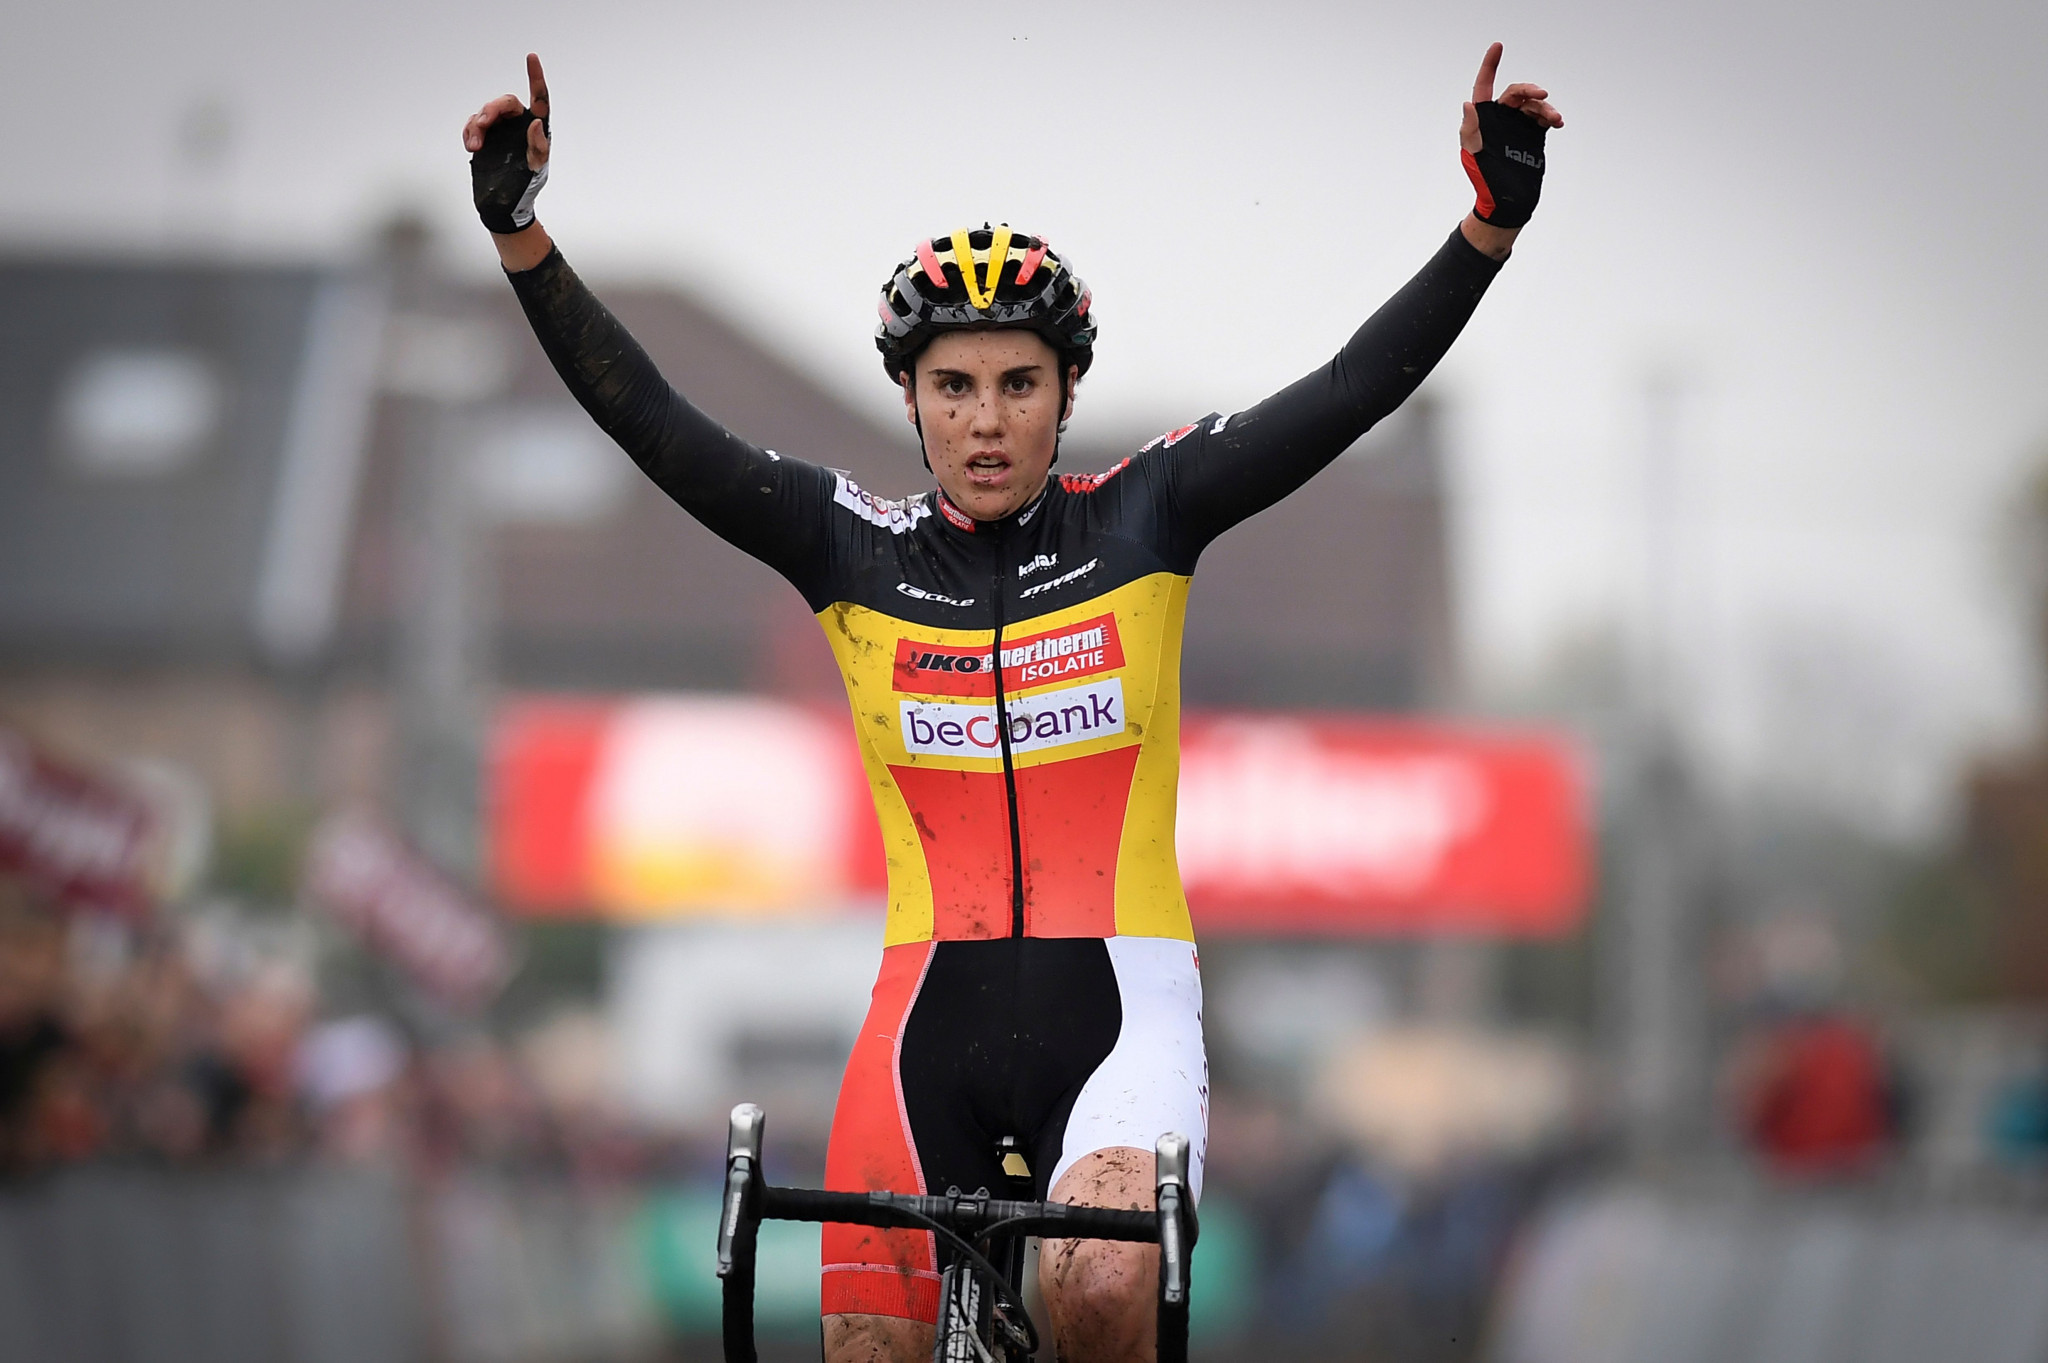 Cant claims 100th career victory at UCI Cyclo-cross World Cup